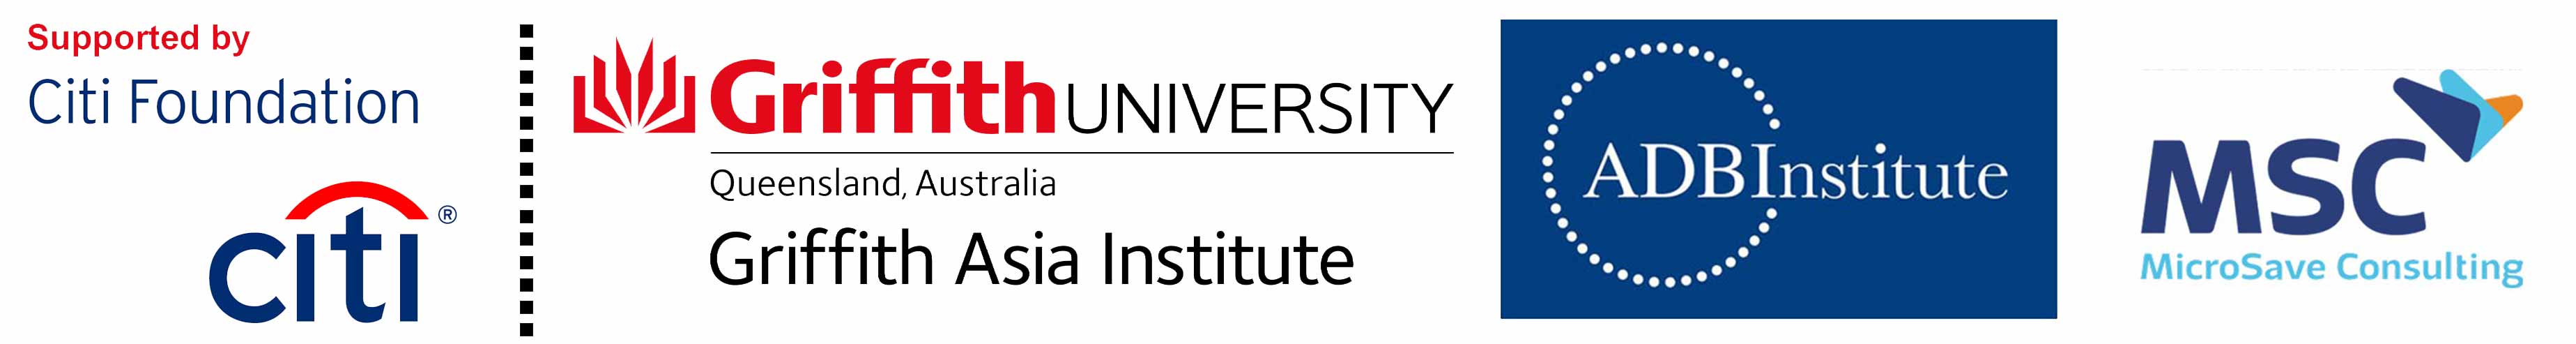 Logos for Griffith University, ADB Institute, Citi Foundation and MicroSave Consulting